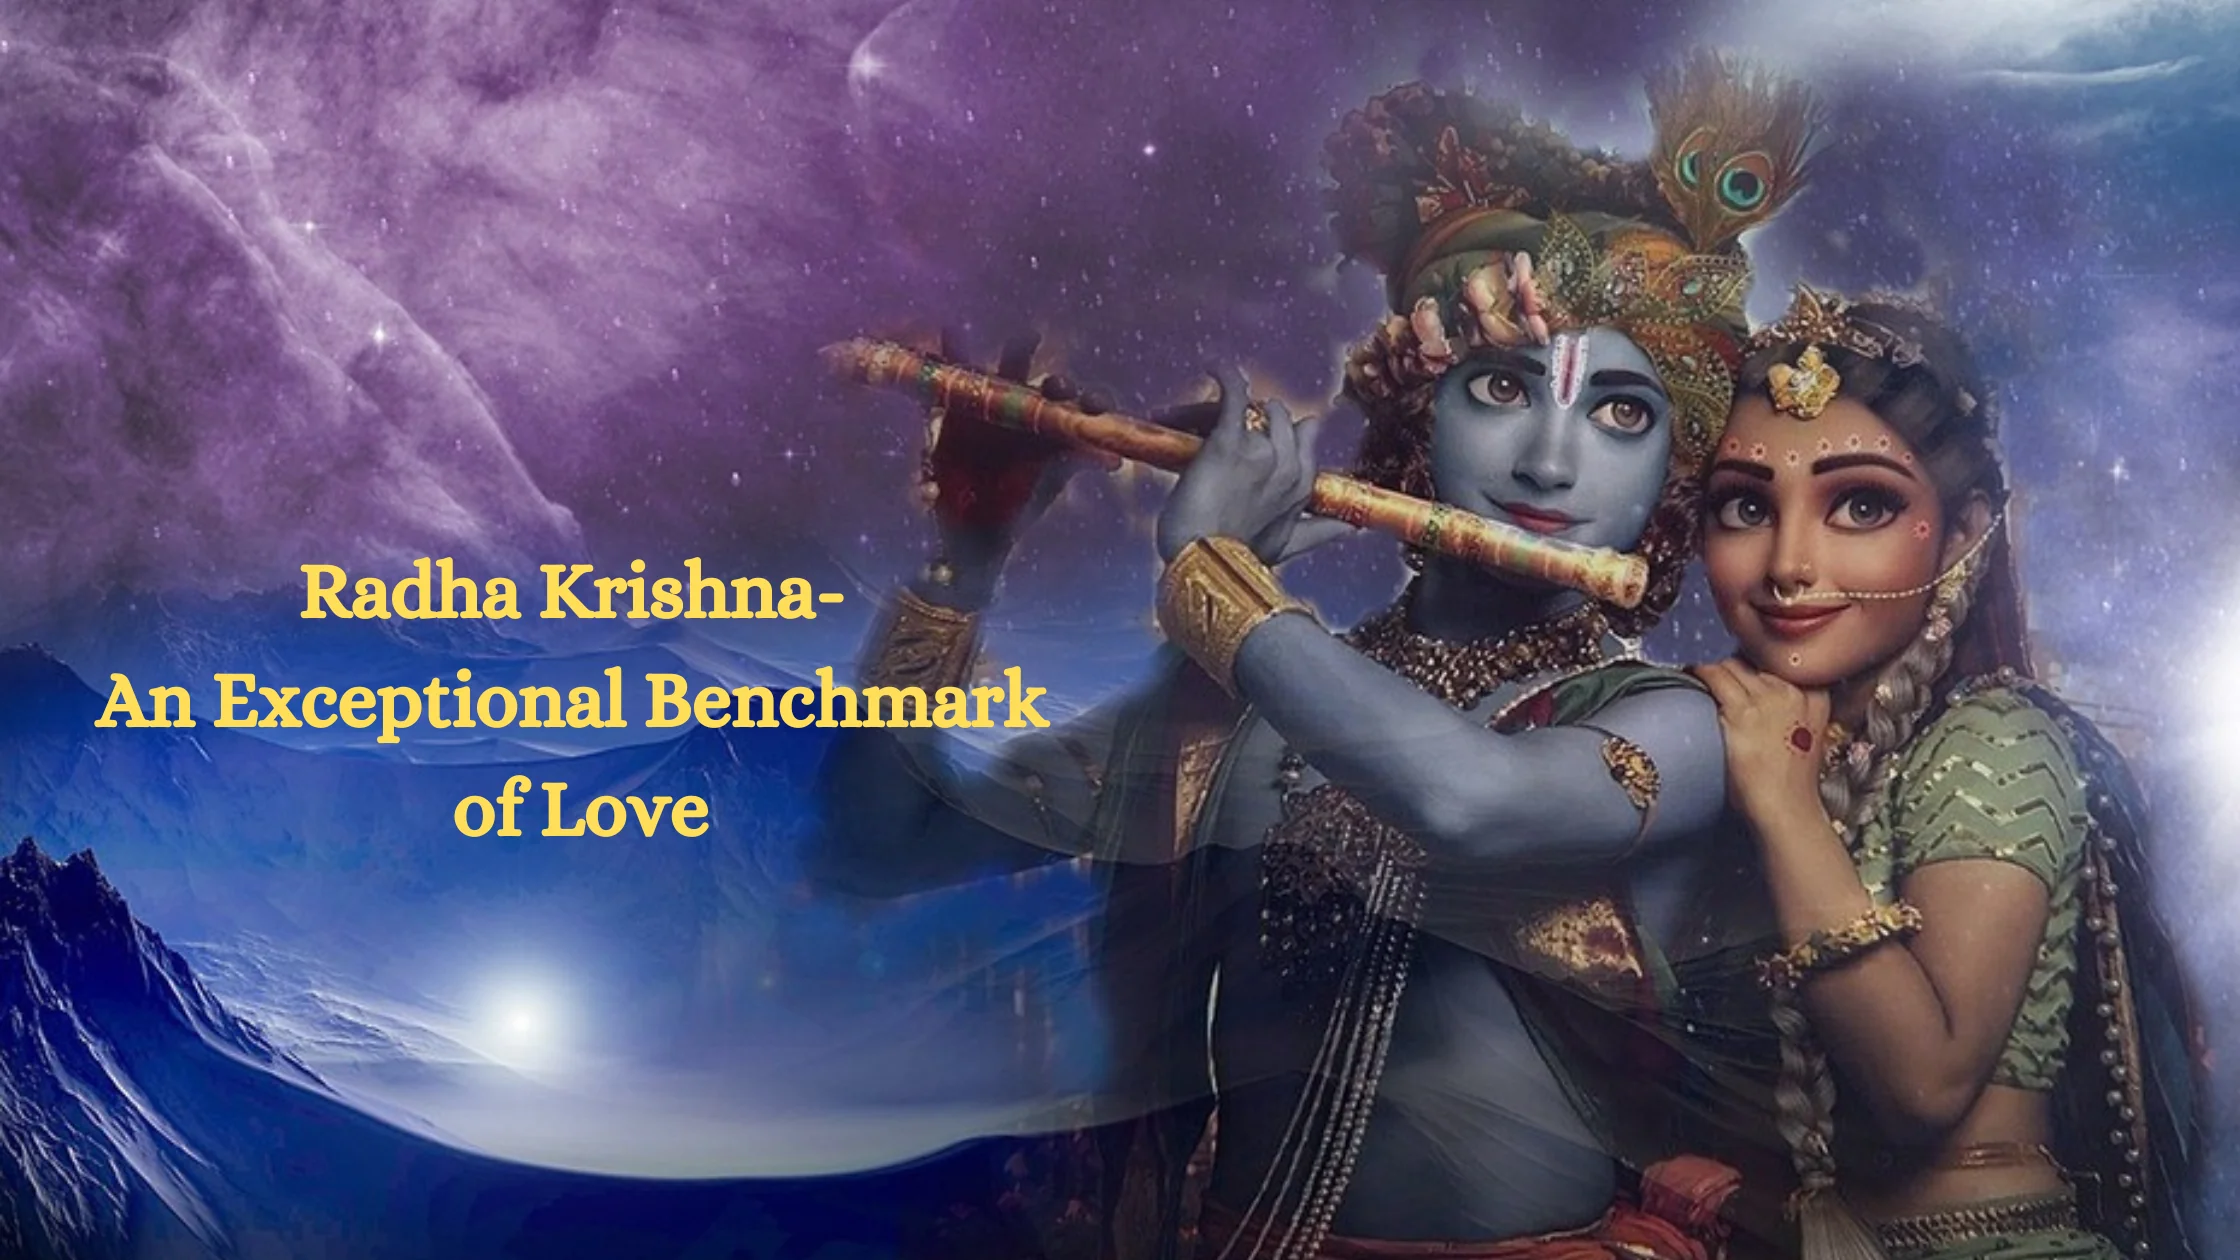 Do You Know The Reasons Why Lord Krishna Didn't Married Radha